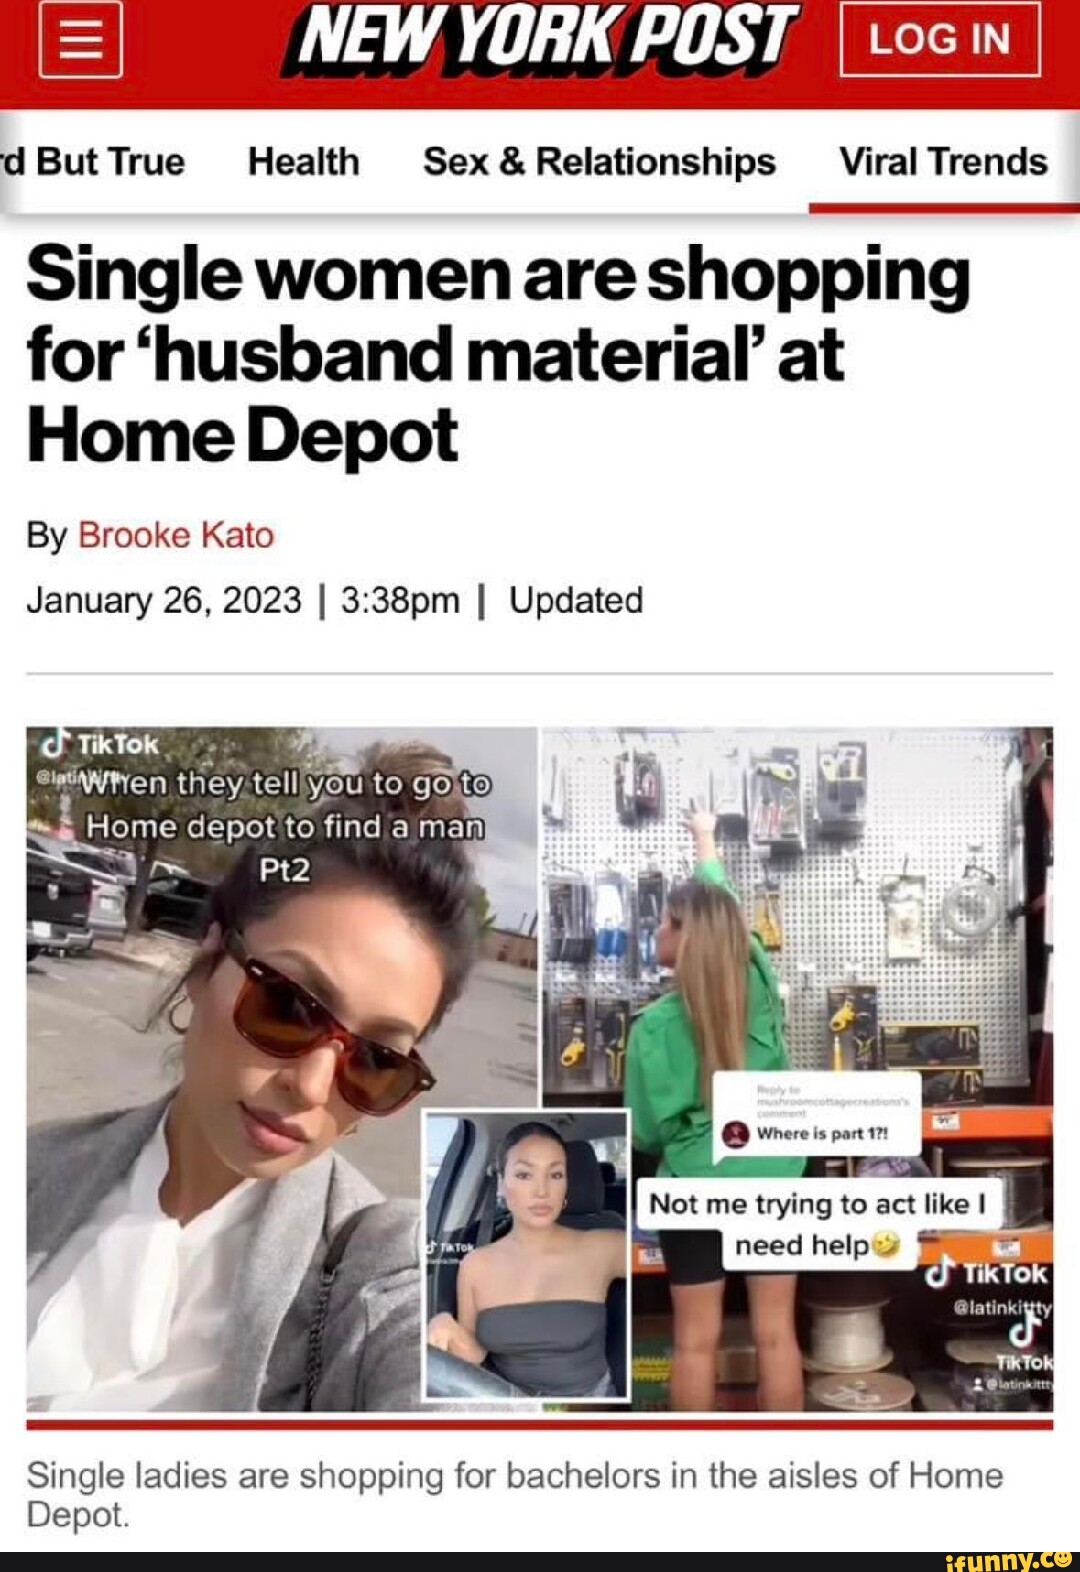 Single women are shopping for 'husband material' at Home Depot